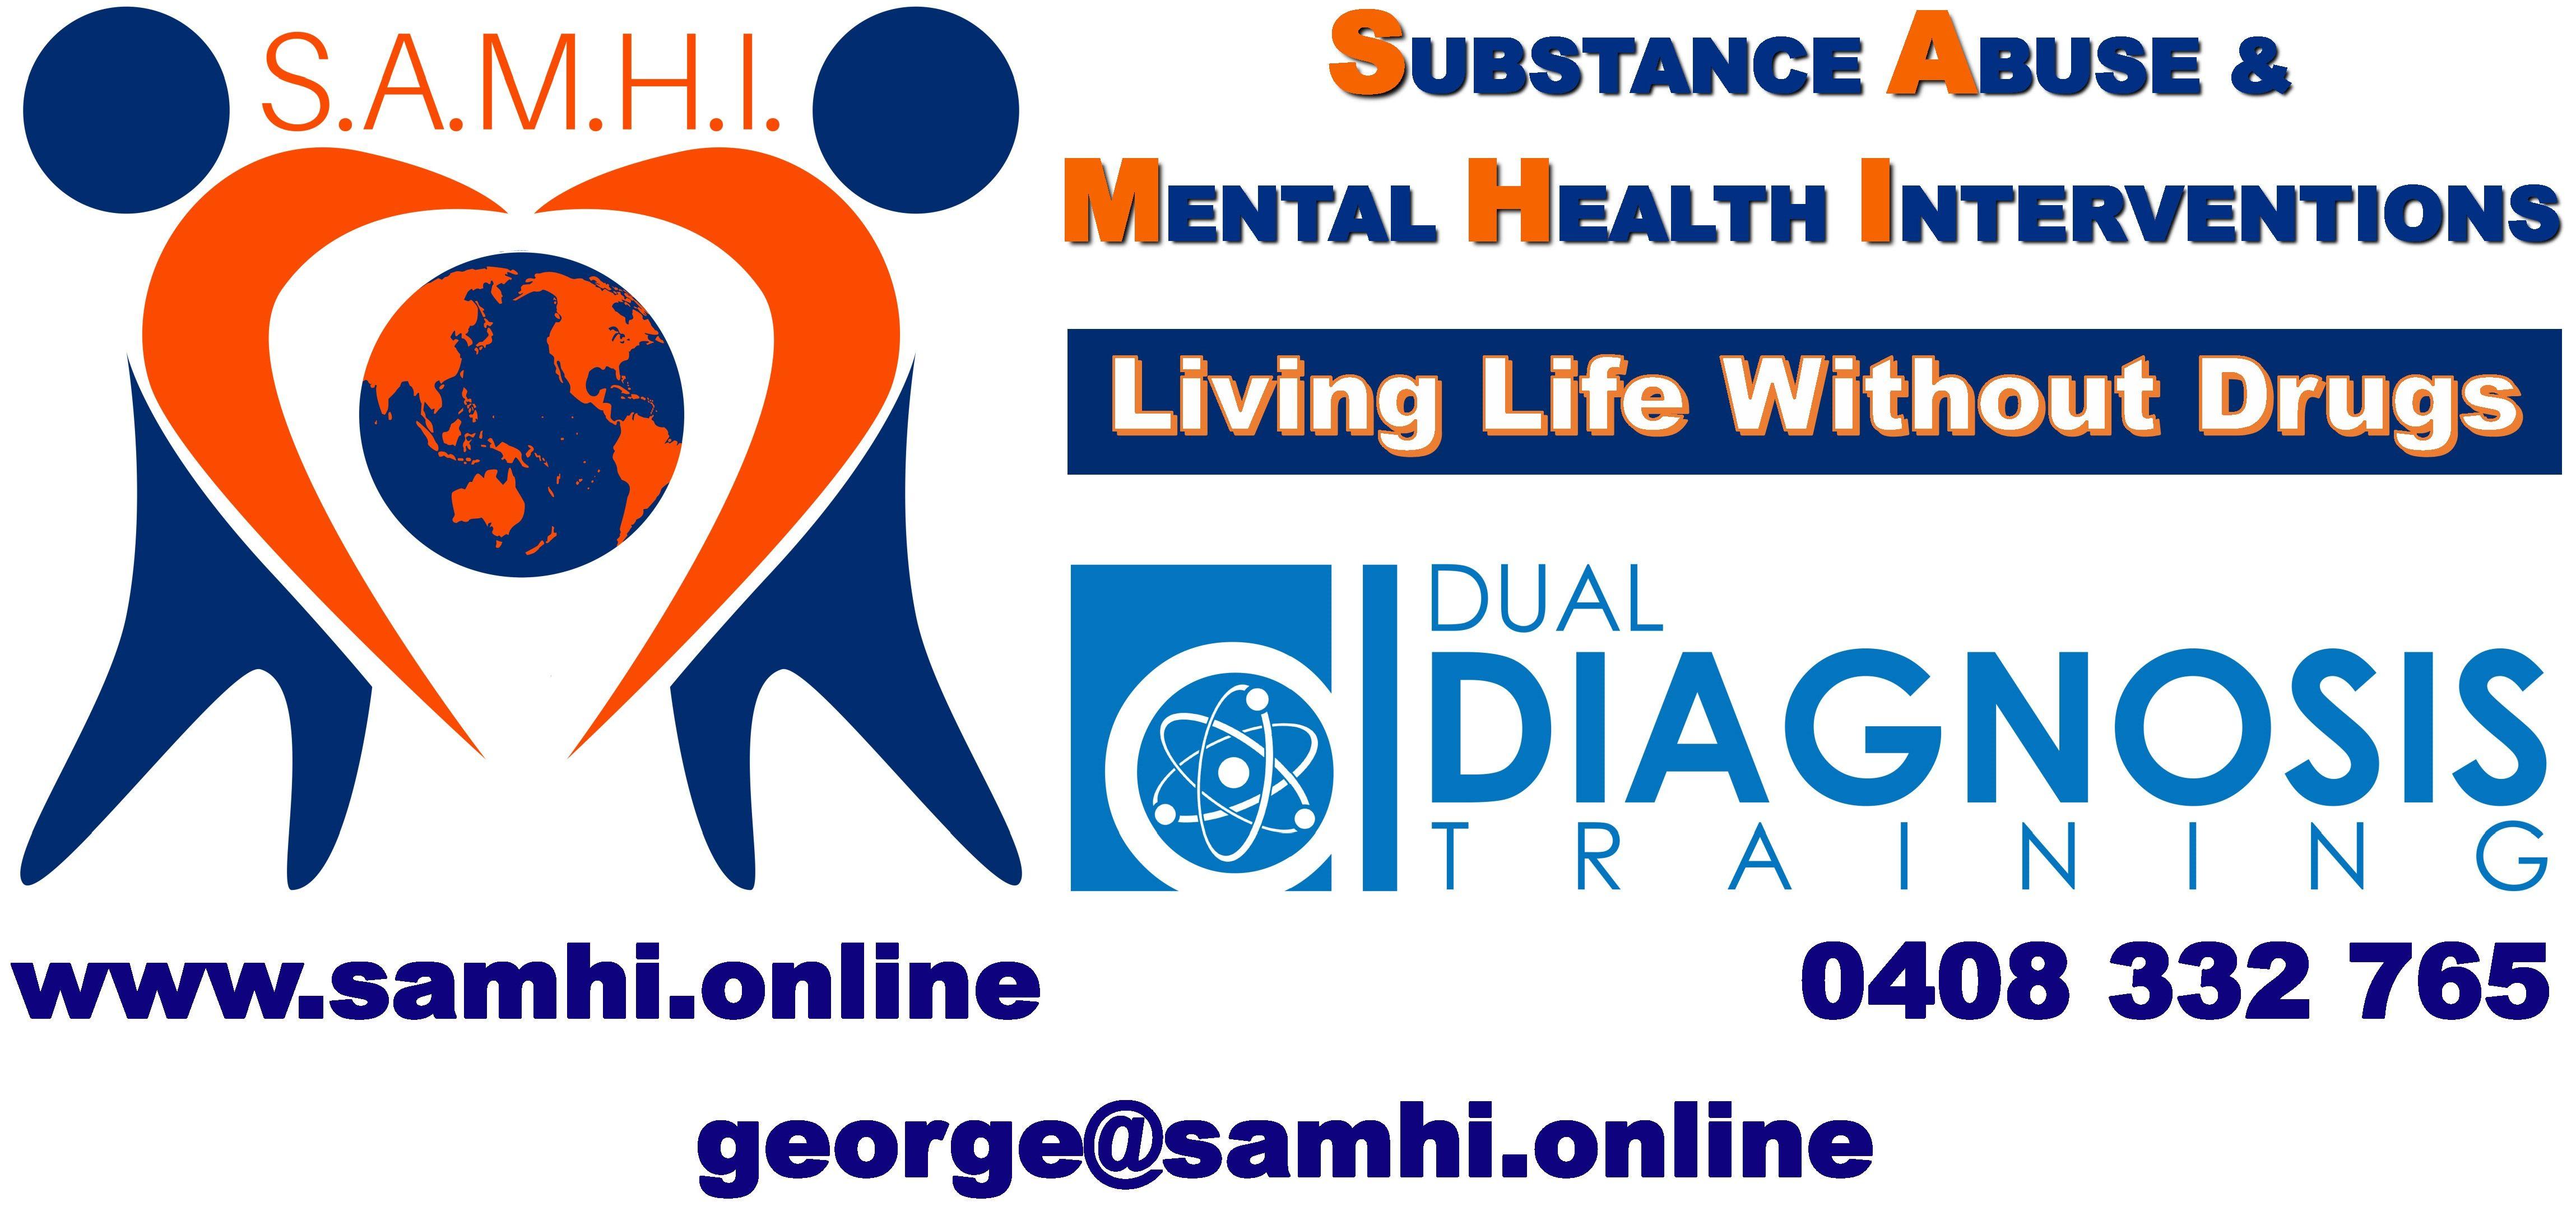 Abuse Logo - S.A.M.H.I. ONLINE | Substance Abuse & Mental Health Interventions